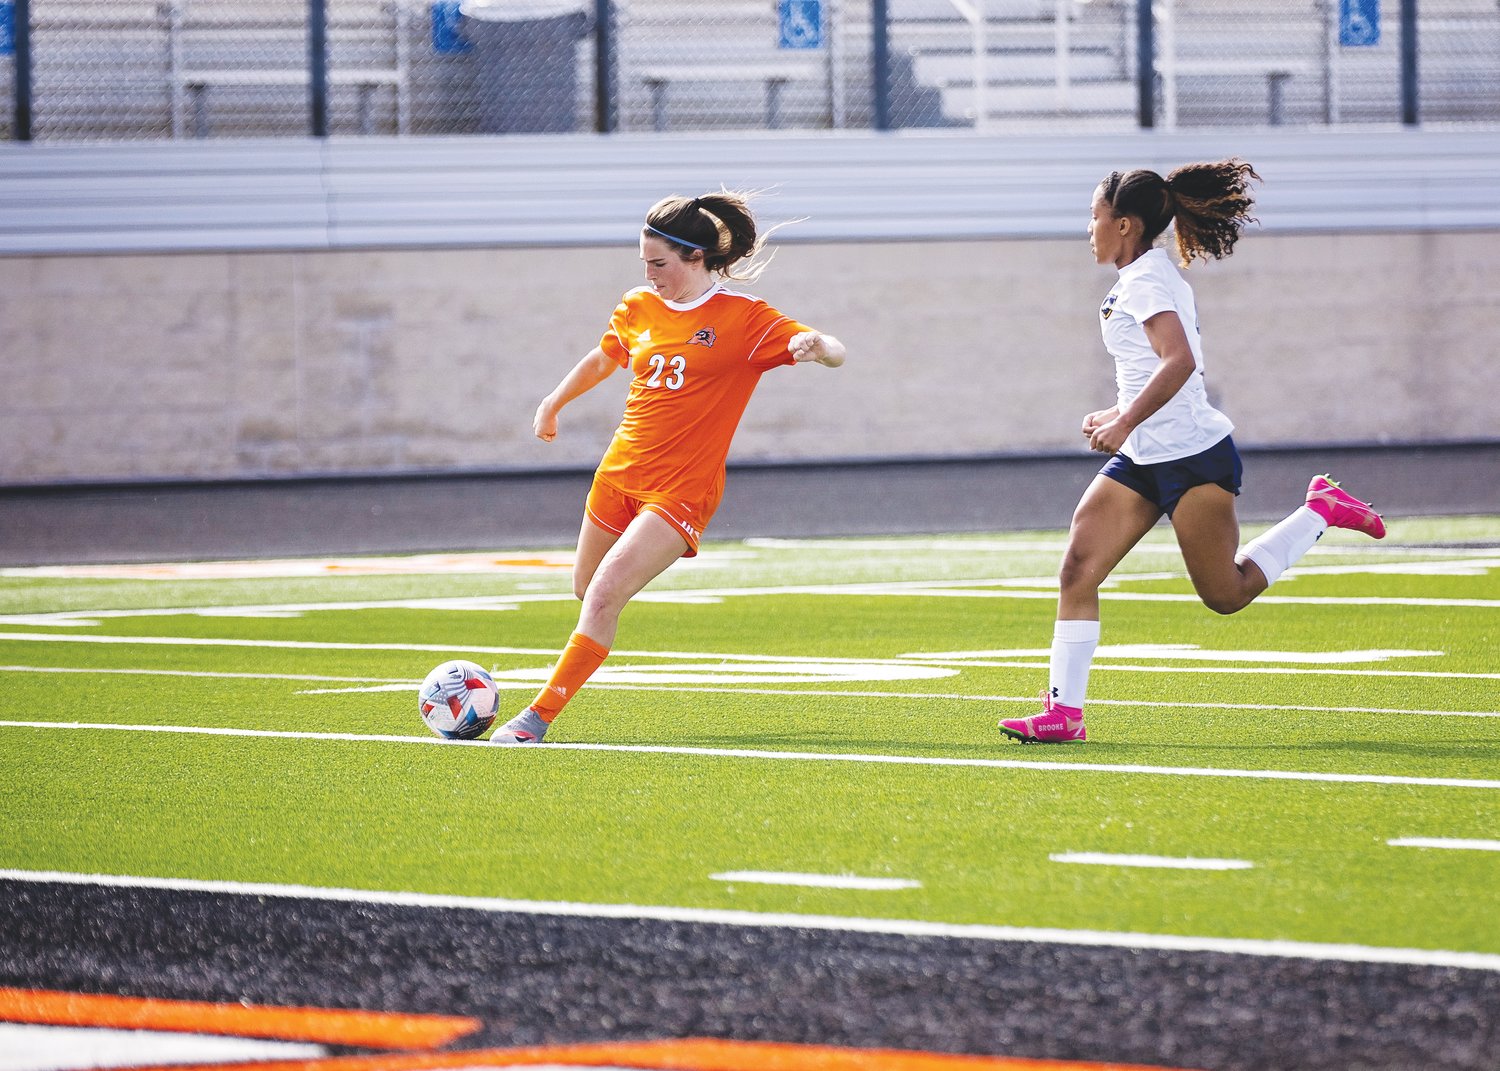 McKenna Vela scored a goal and had an assist in Aledo's game against Waxahachie.